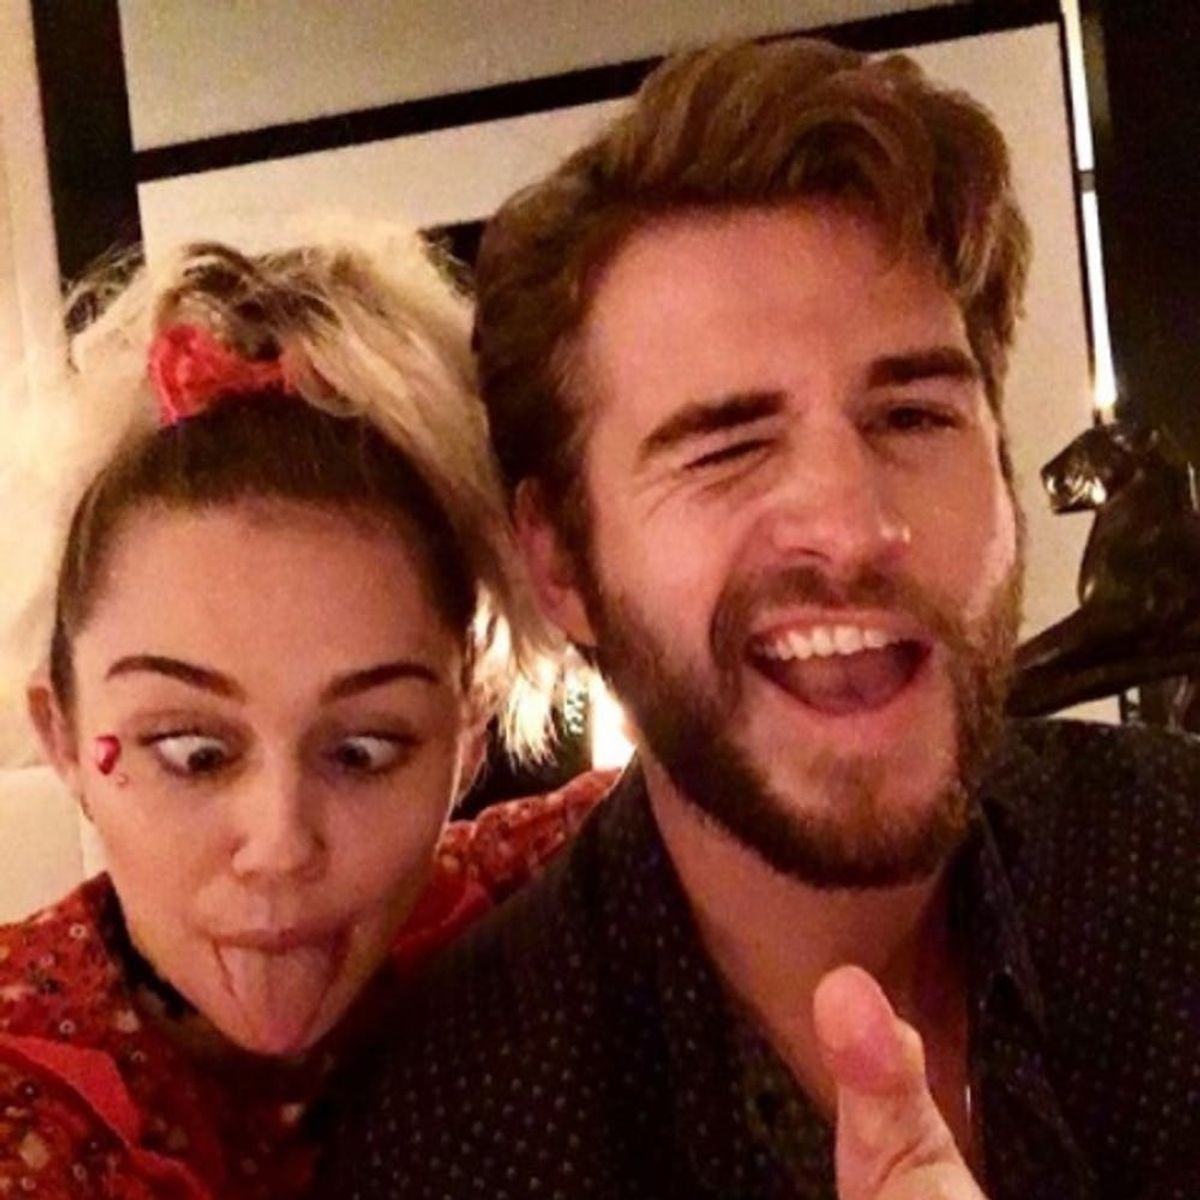 Miley Cyrus Finally Revealed the Real Reason She Broke Up With Liam Hemsworth